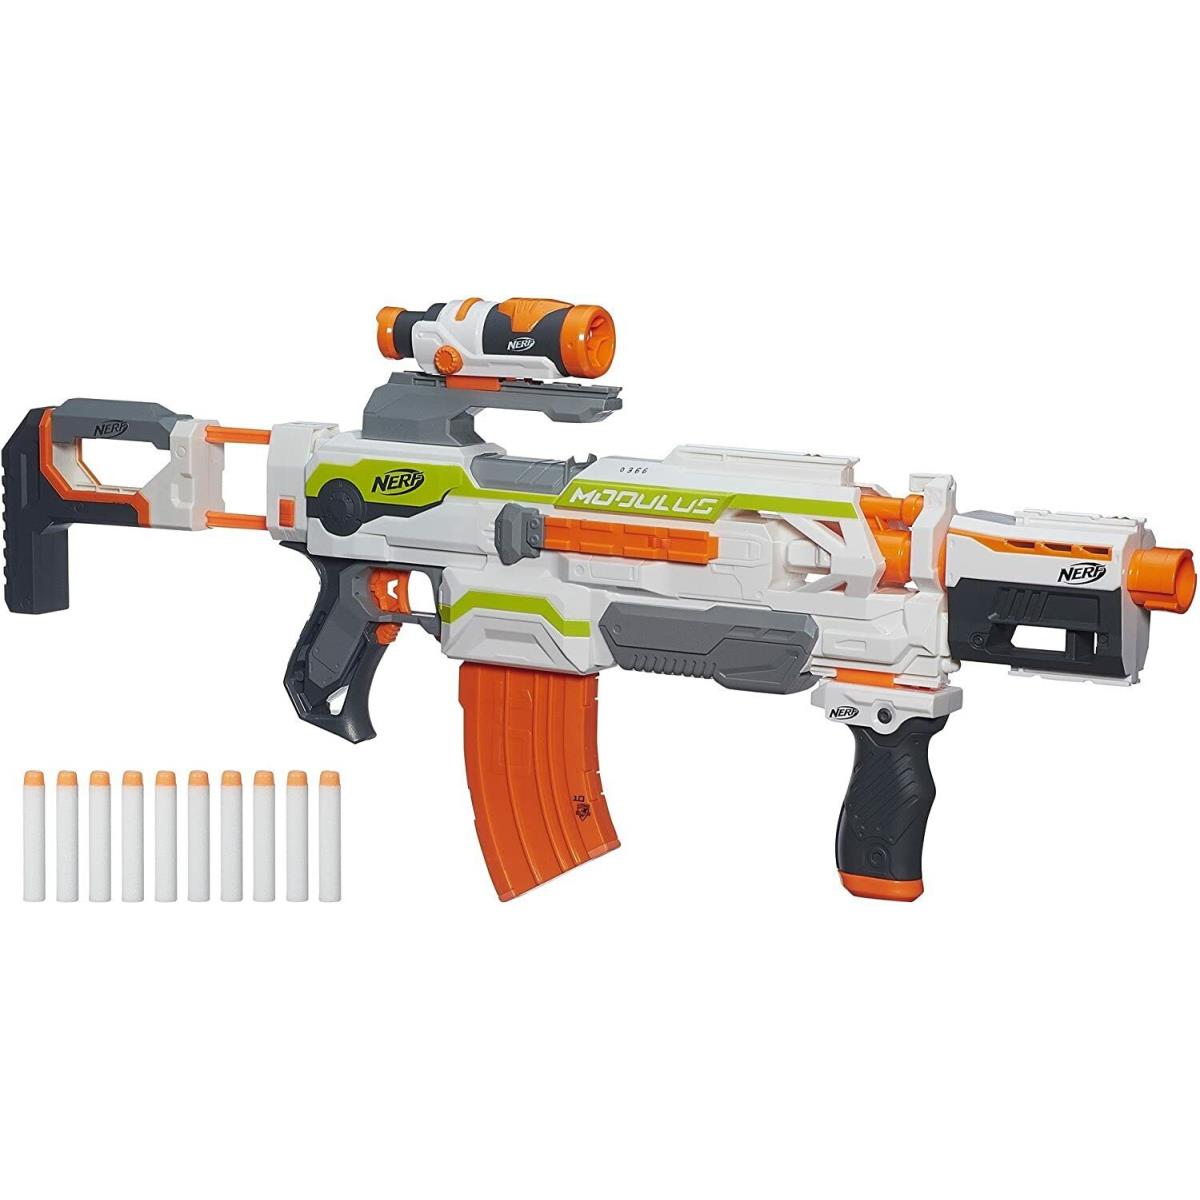 Customize The Kids N-strike Modulus ECS-10 Blaster with The Multiple Gear Upgrad